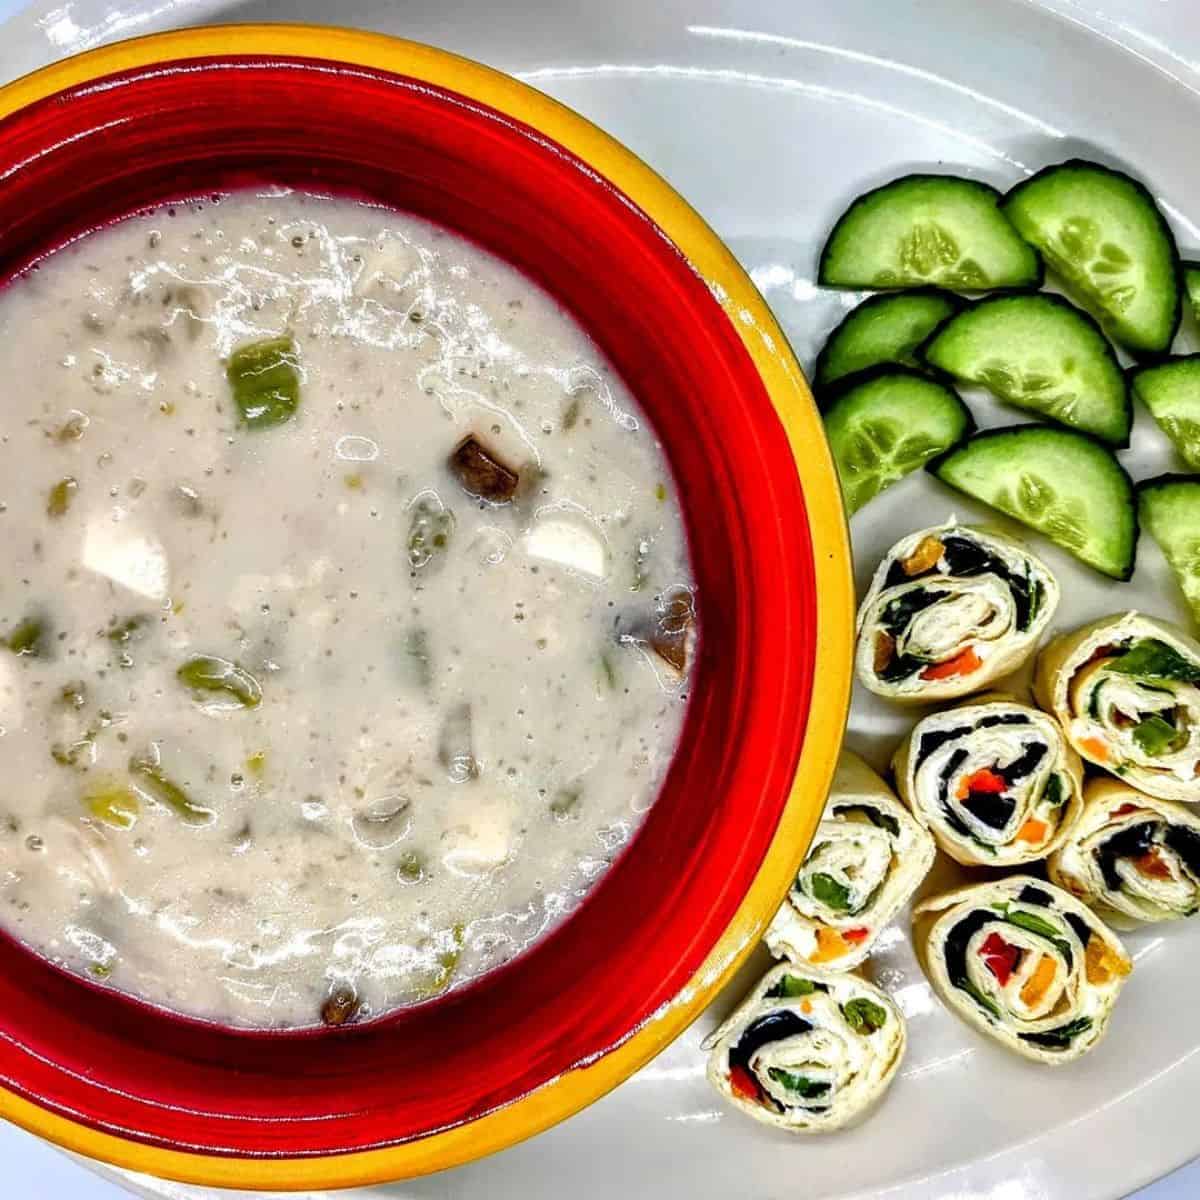 Flavourful cream of mushroom and celery soup in a red bowl